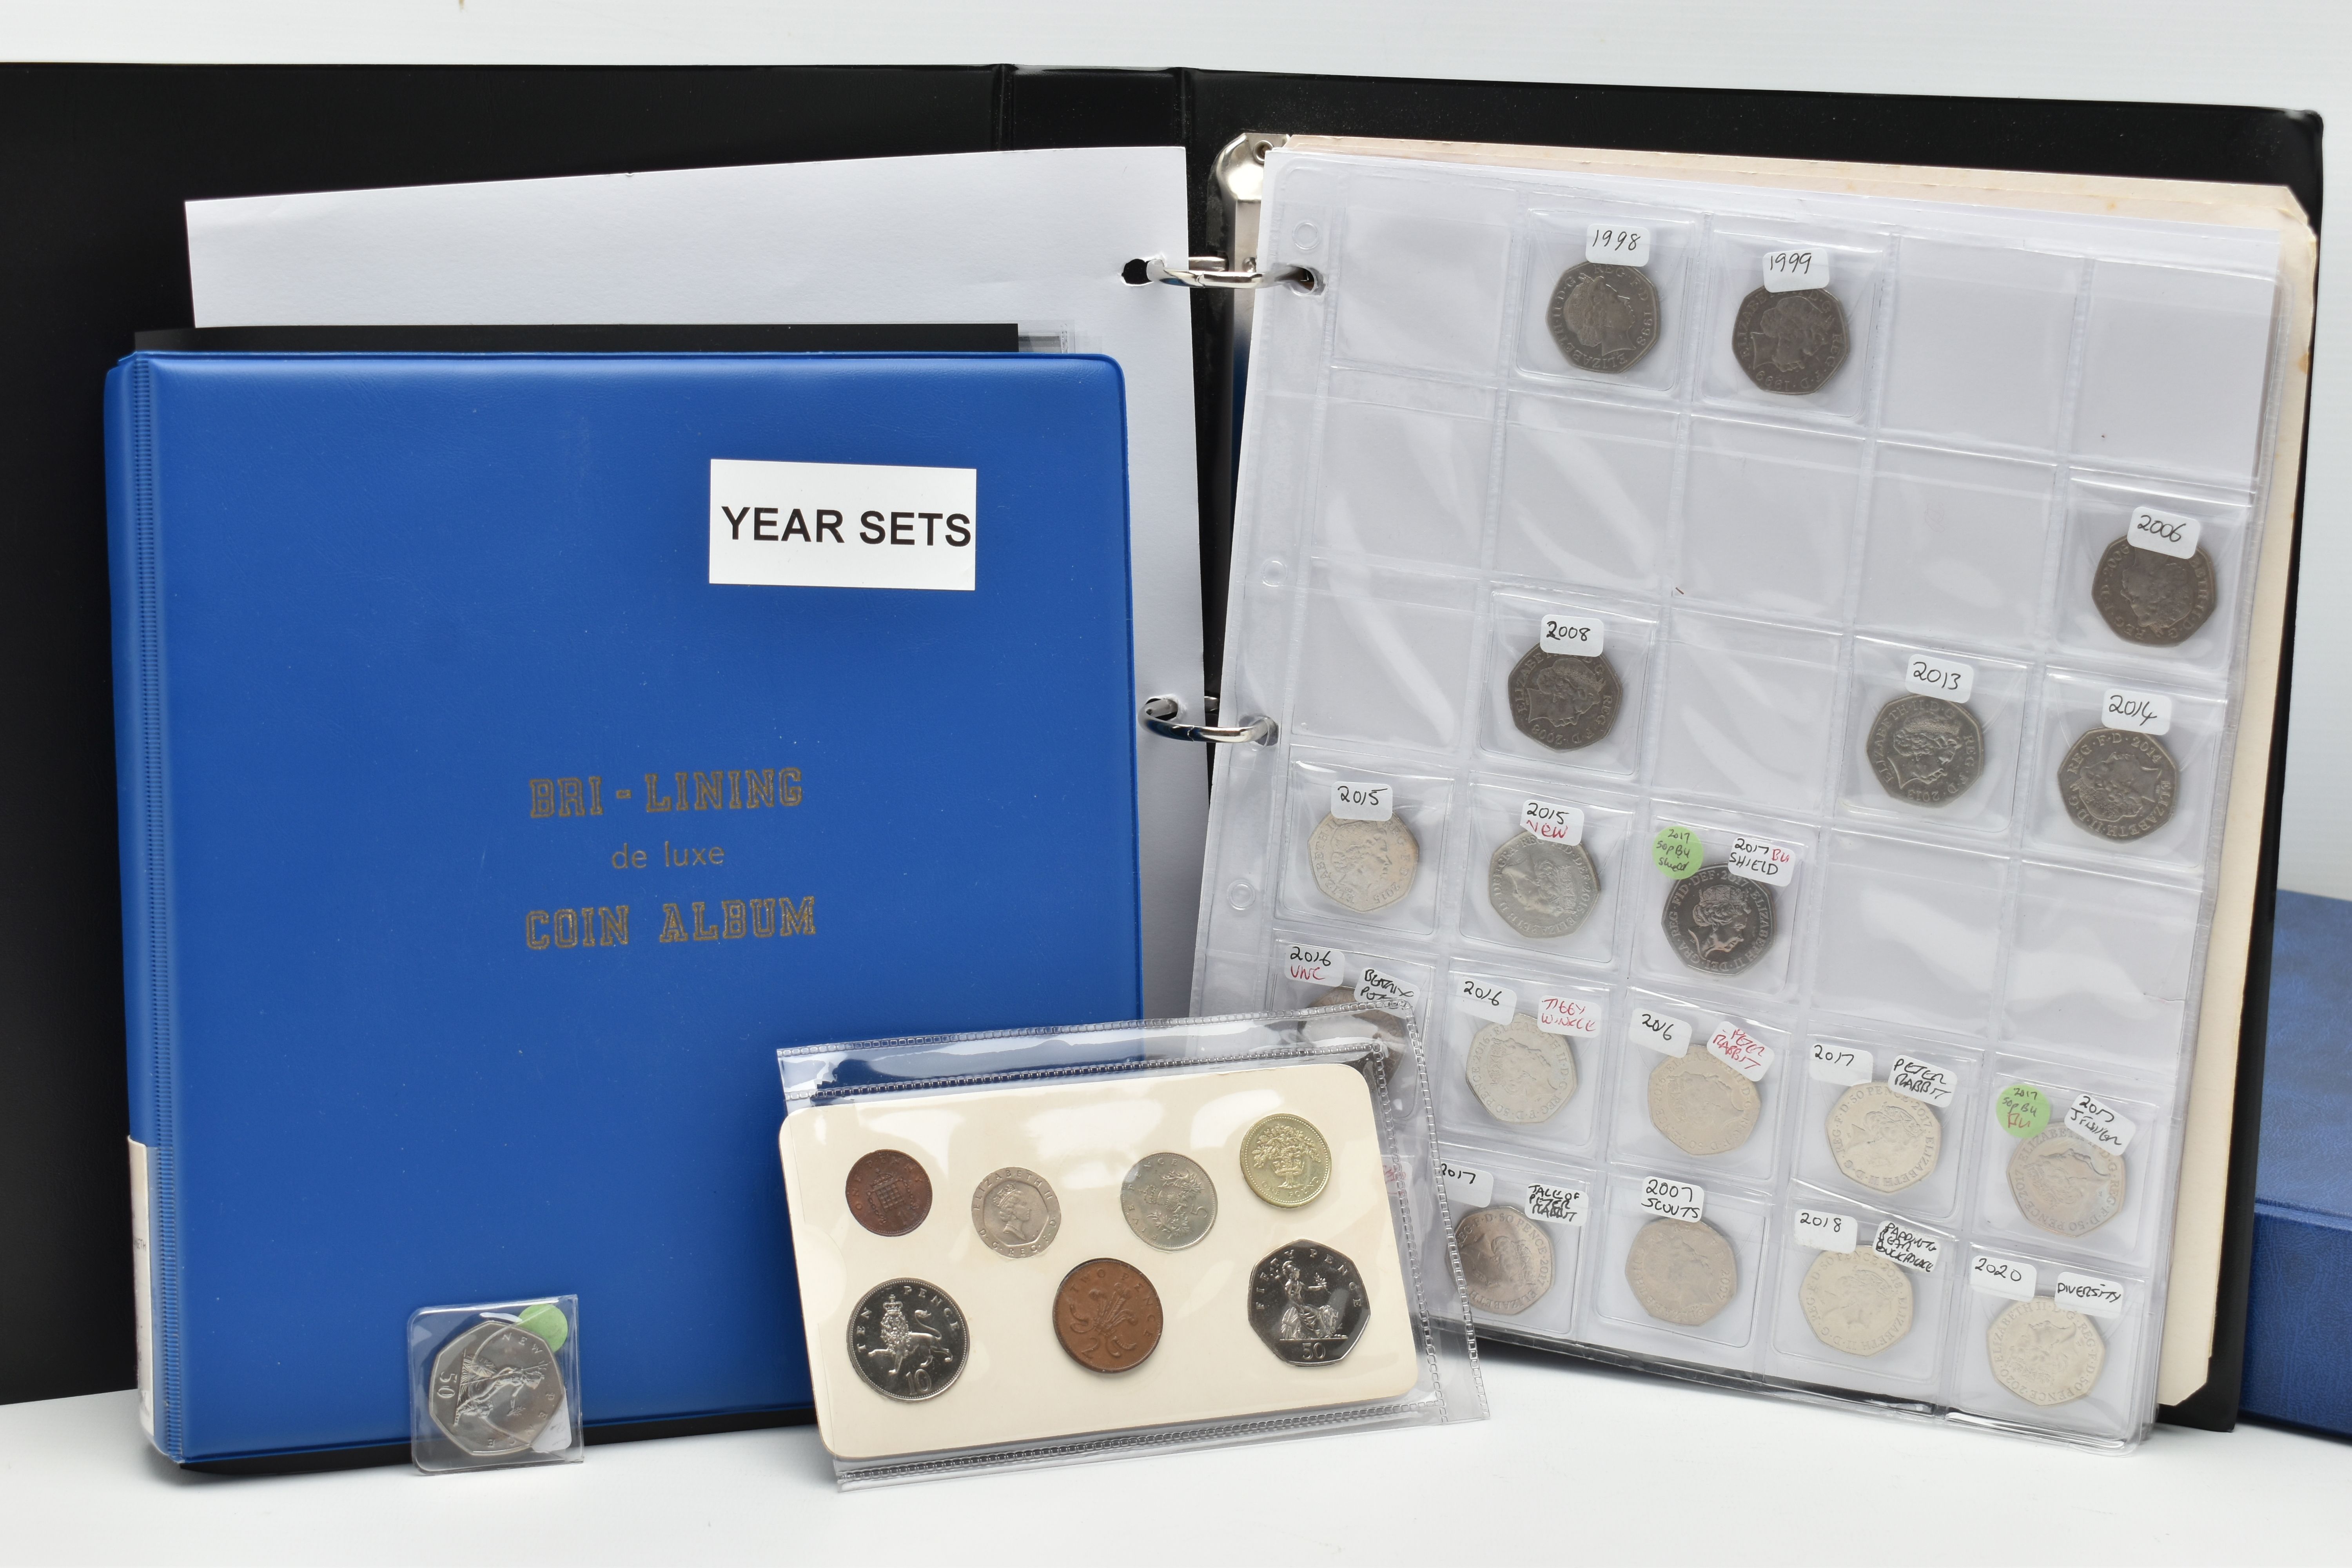 TWO COIN ALBUMS OF UK COINAGE FROM 1974-2018, to include Two Pound coins, Fifty Pence coins, with